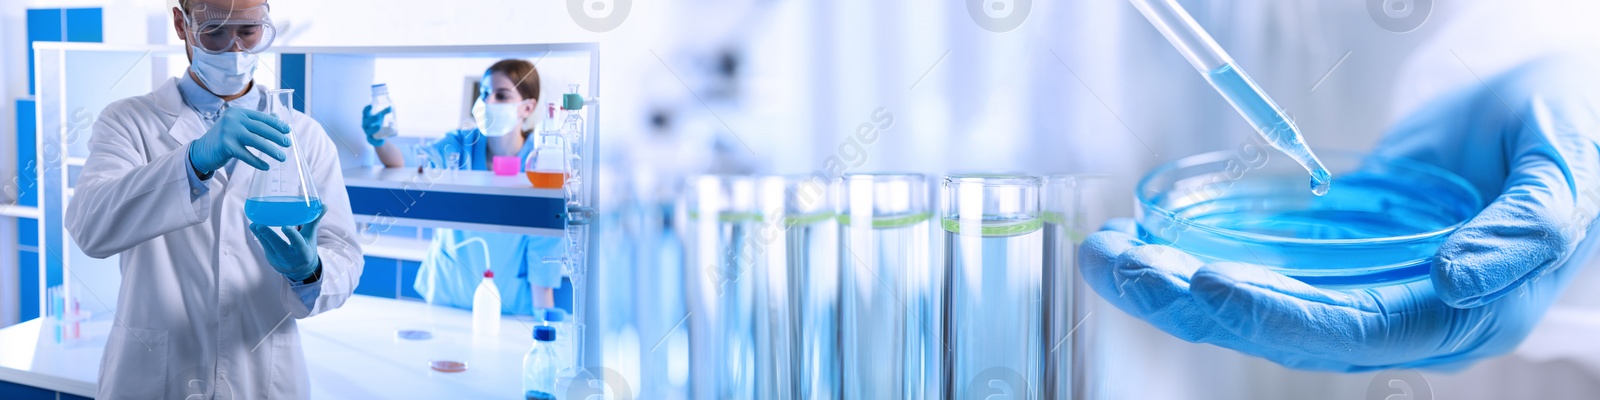 Image of Chemistry and chemical research. Collage of laboratory glassware and scientists working with liquids. Banner design